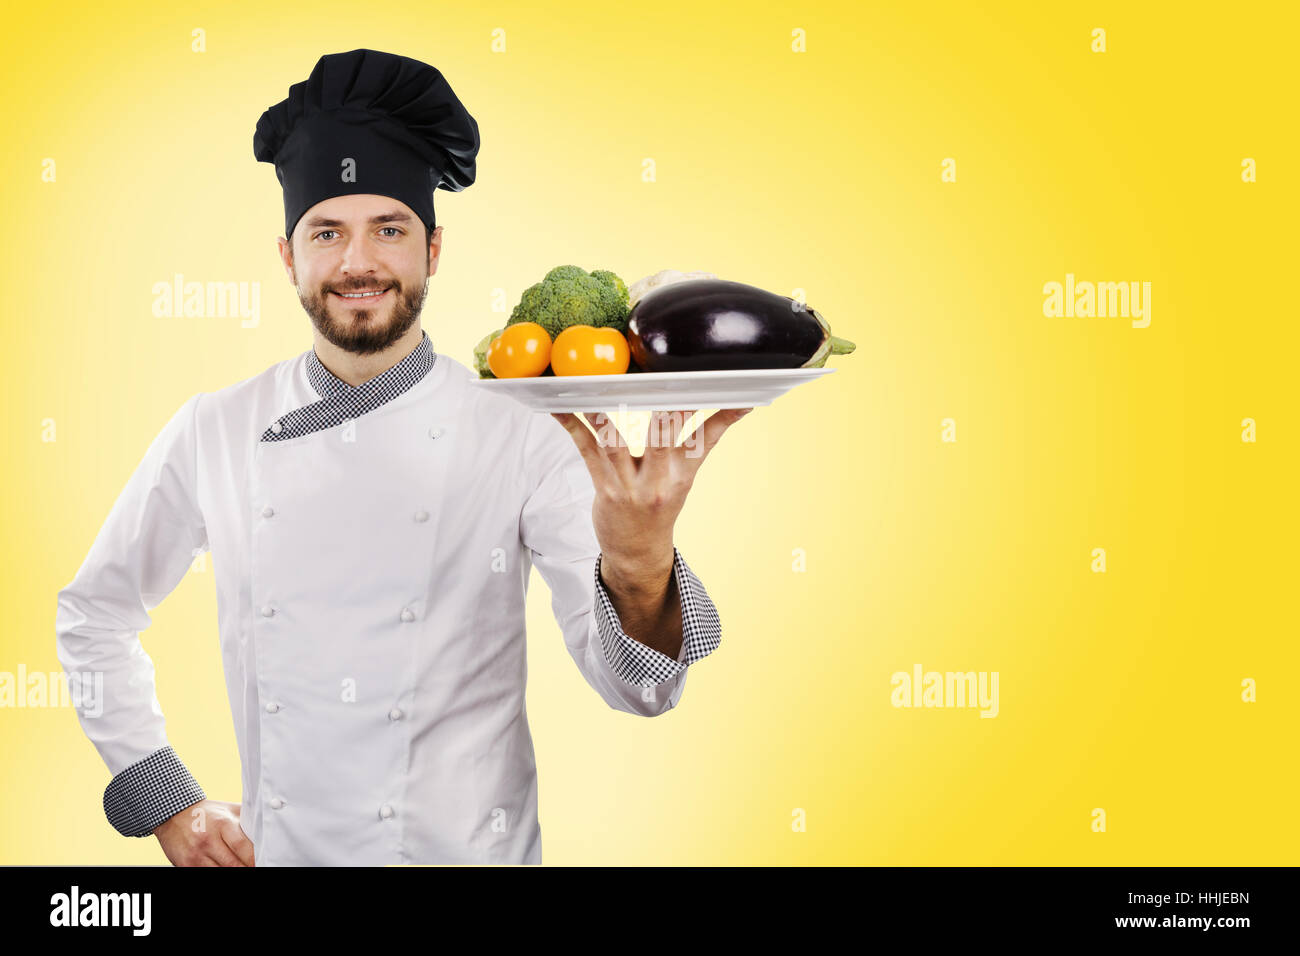 cook holding vegetables plate on yellow background. copy space Stock Photo